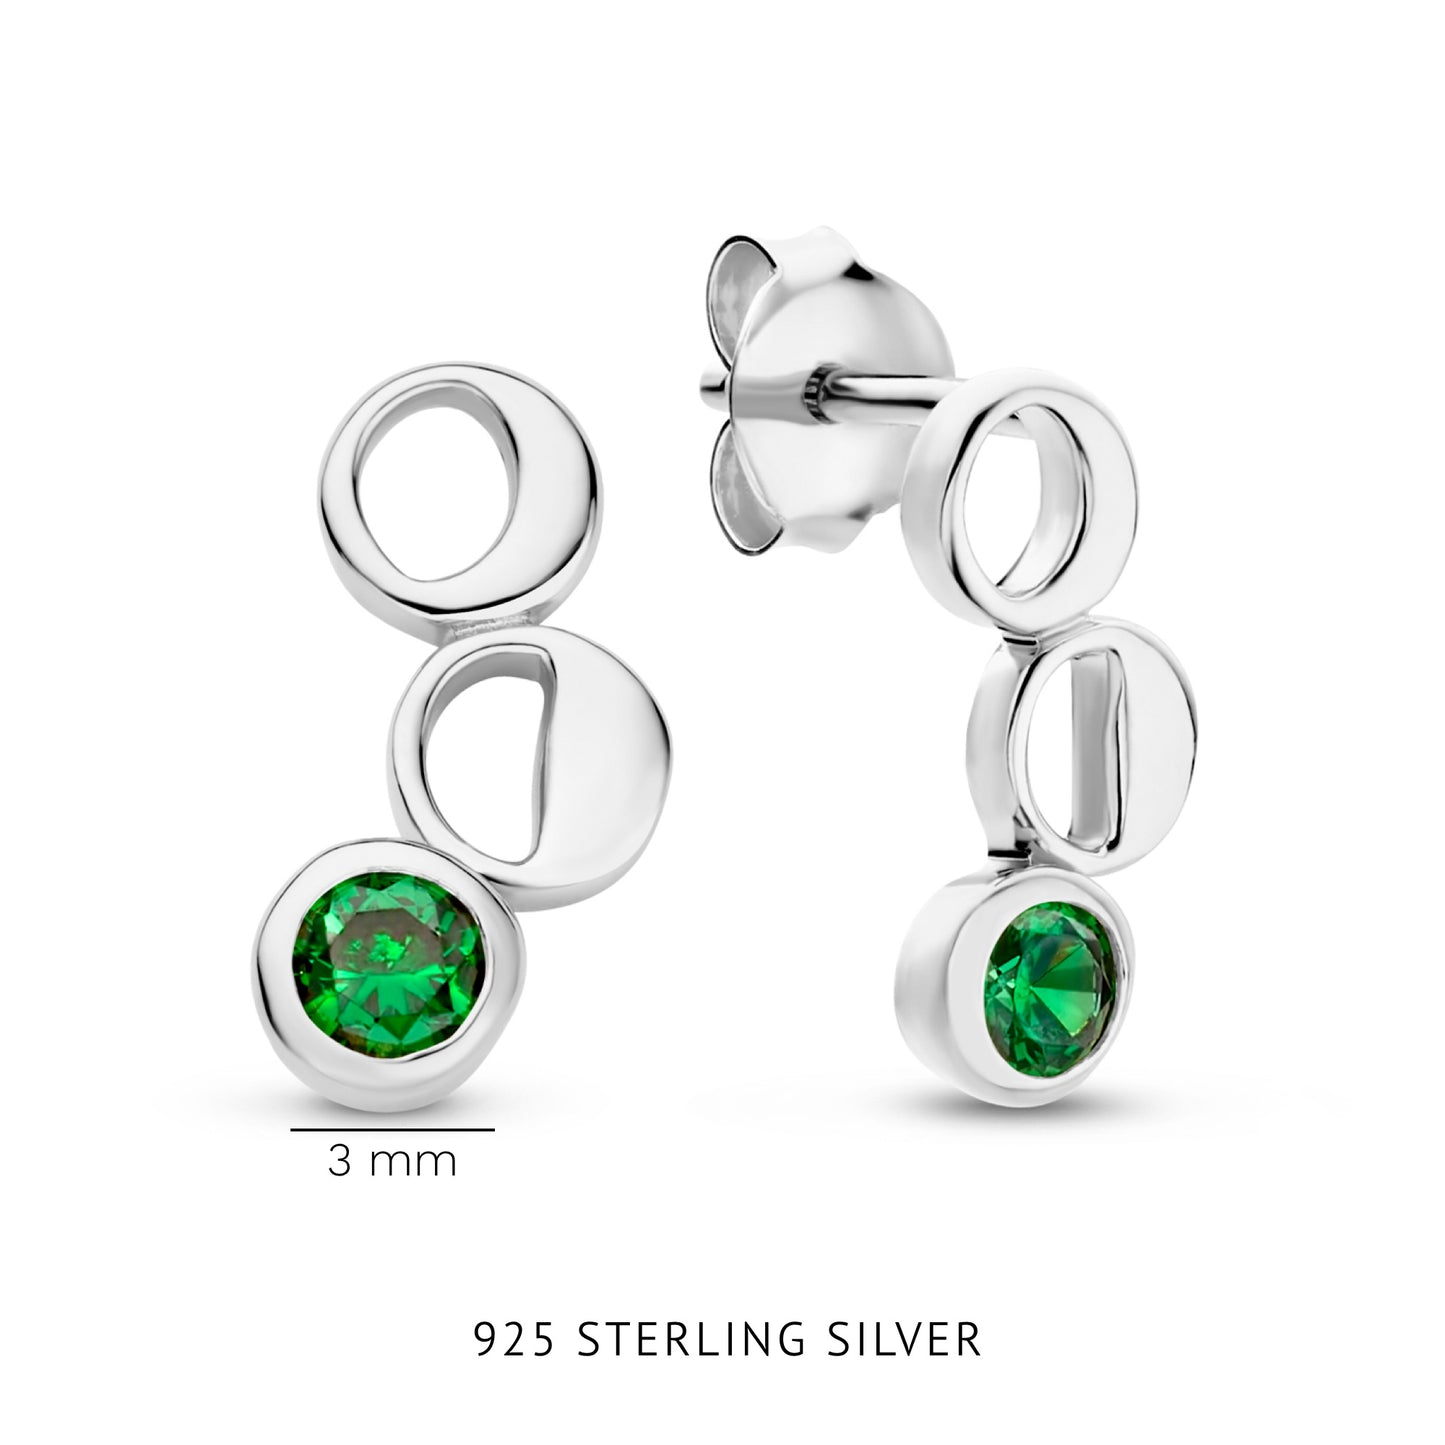 Luna 925 sterling silver ear studs with green zirconia stone